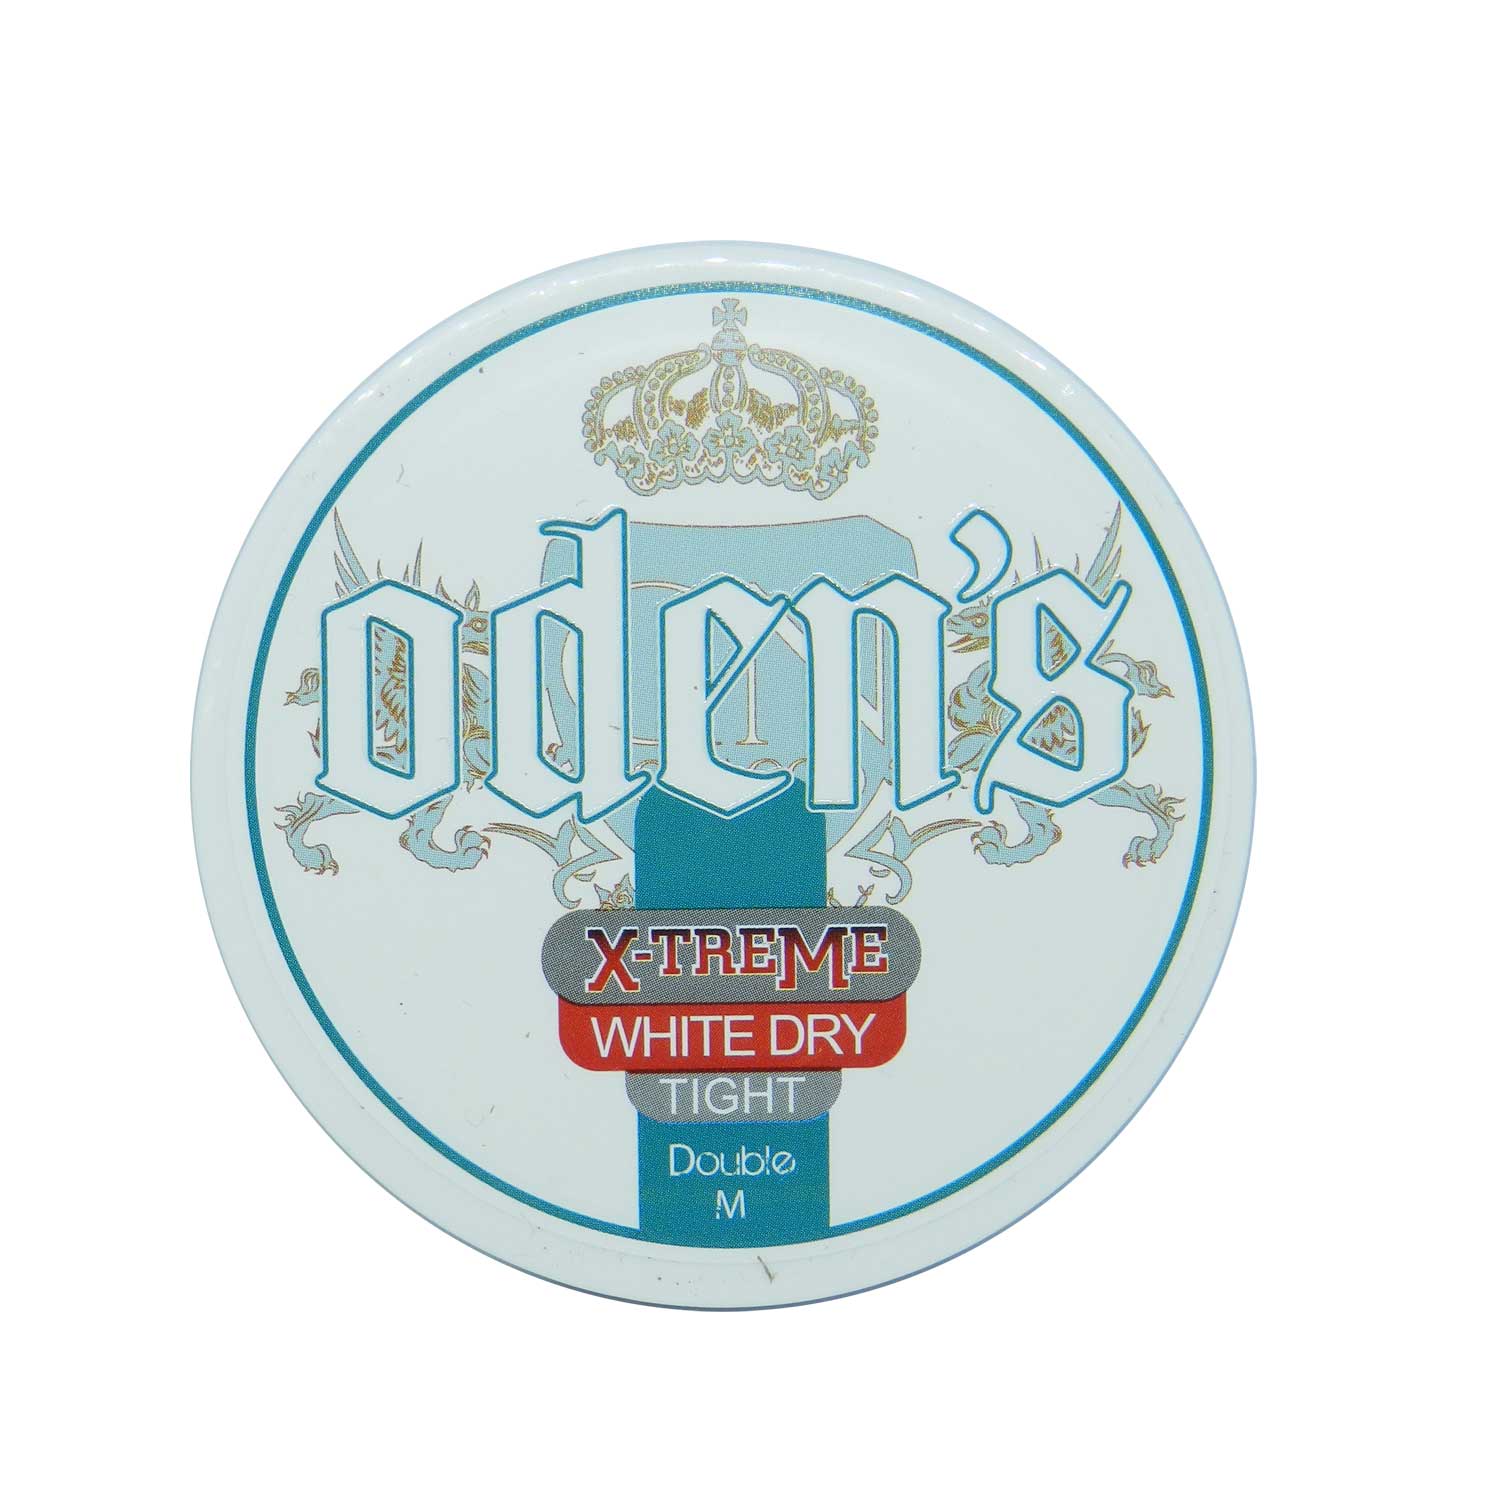 Odens Wintergreen Extreme White Dry Tight